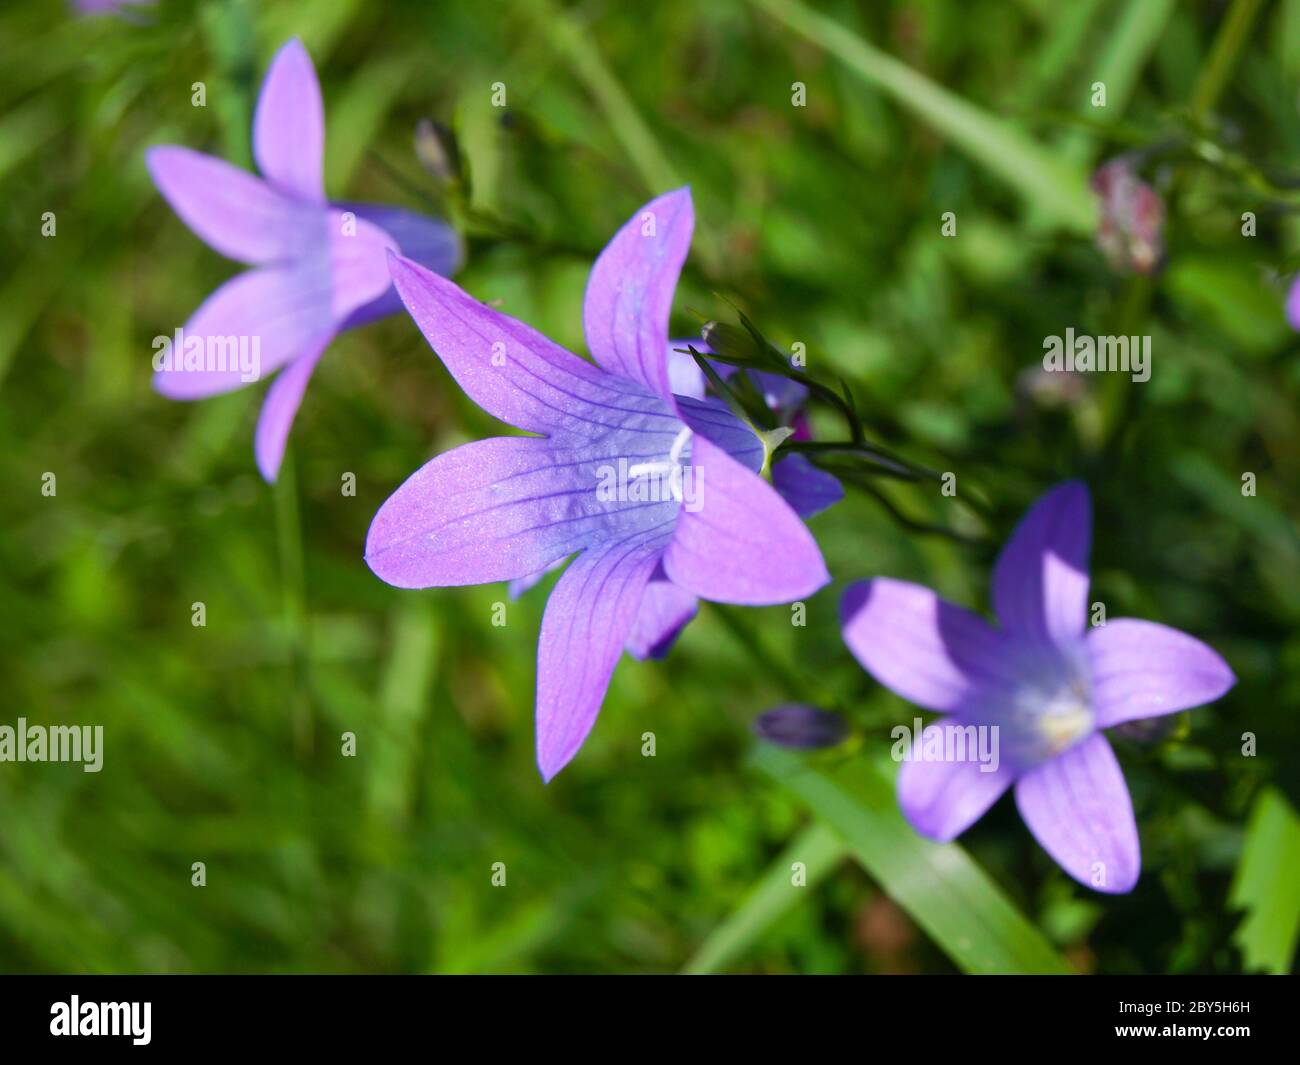 Violet campanula flower on green grass background Stock Photo